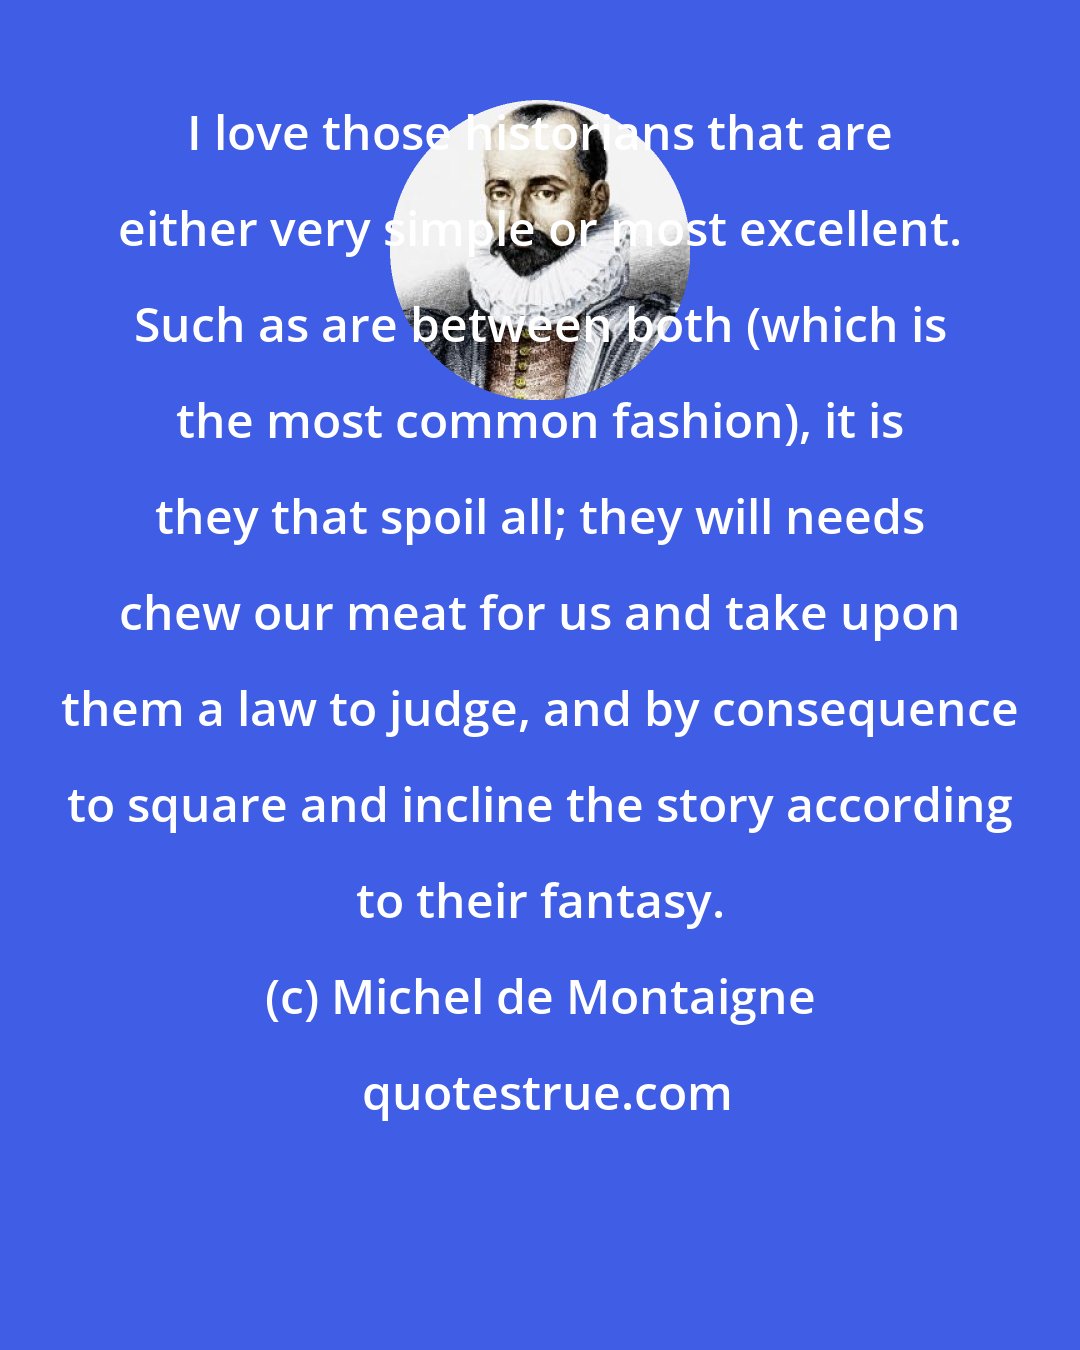 Michel de Montaigne: I love those historians that are either very simple or most excellent. Such as are between both (which is the most common fashion), it is they that spoil all; they will needs chew our meat for us and take upon them a law to judge, and by consequence to square and incline the story according to their fantasy.